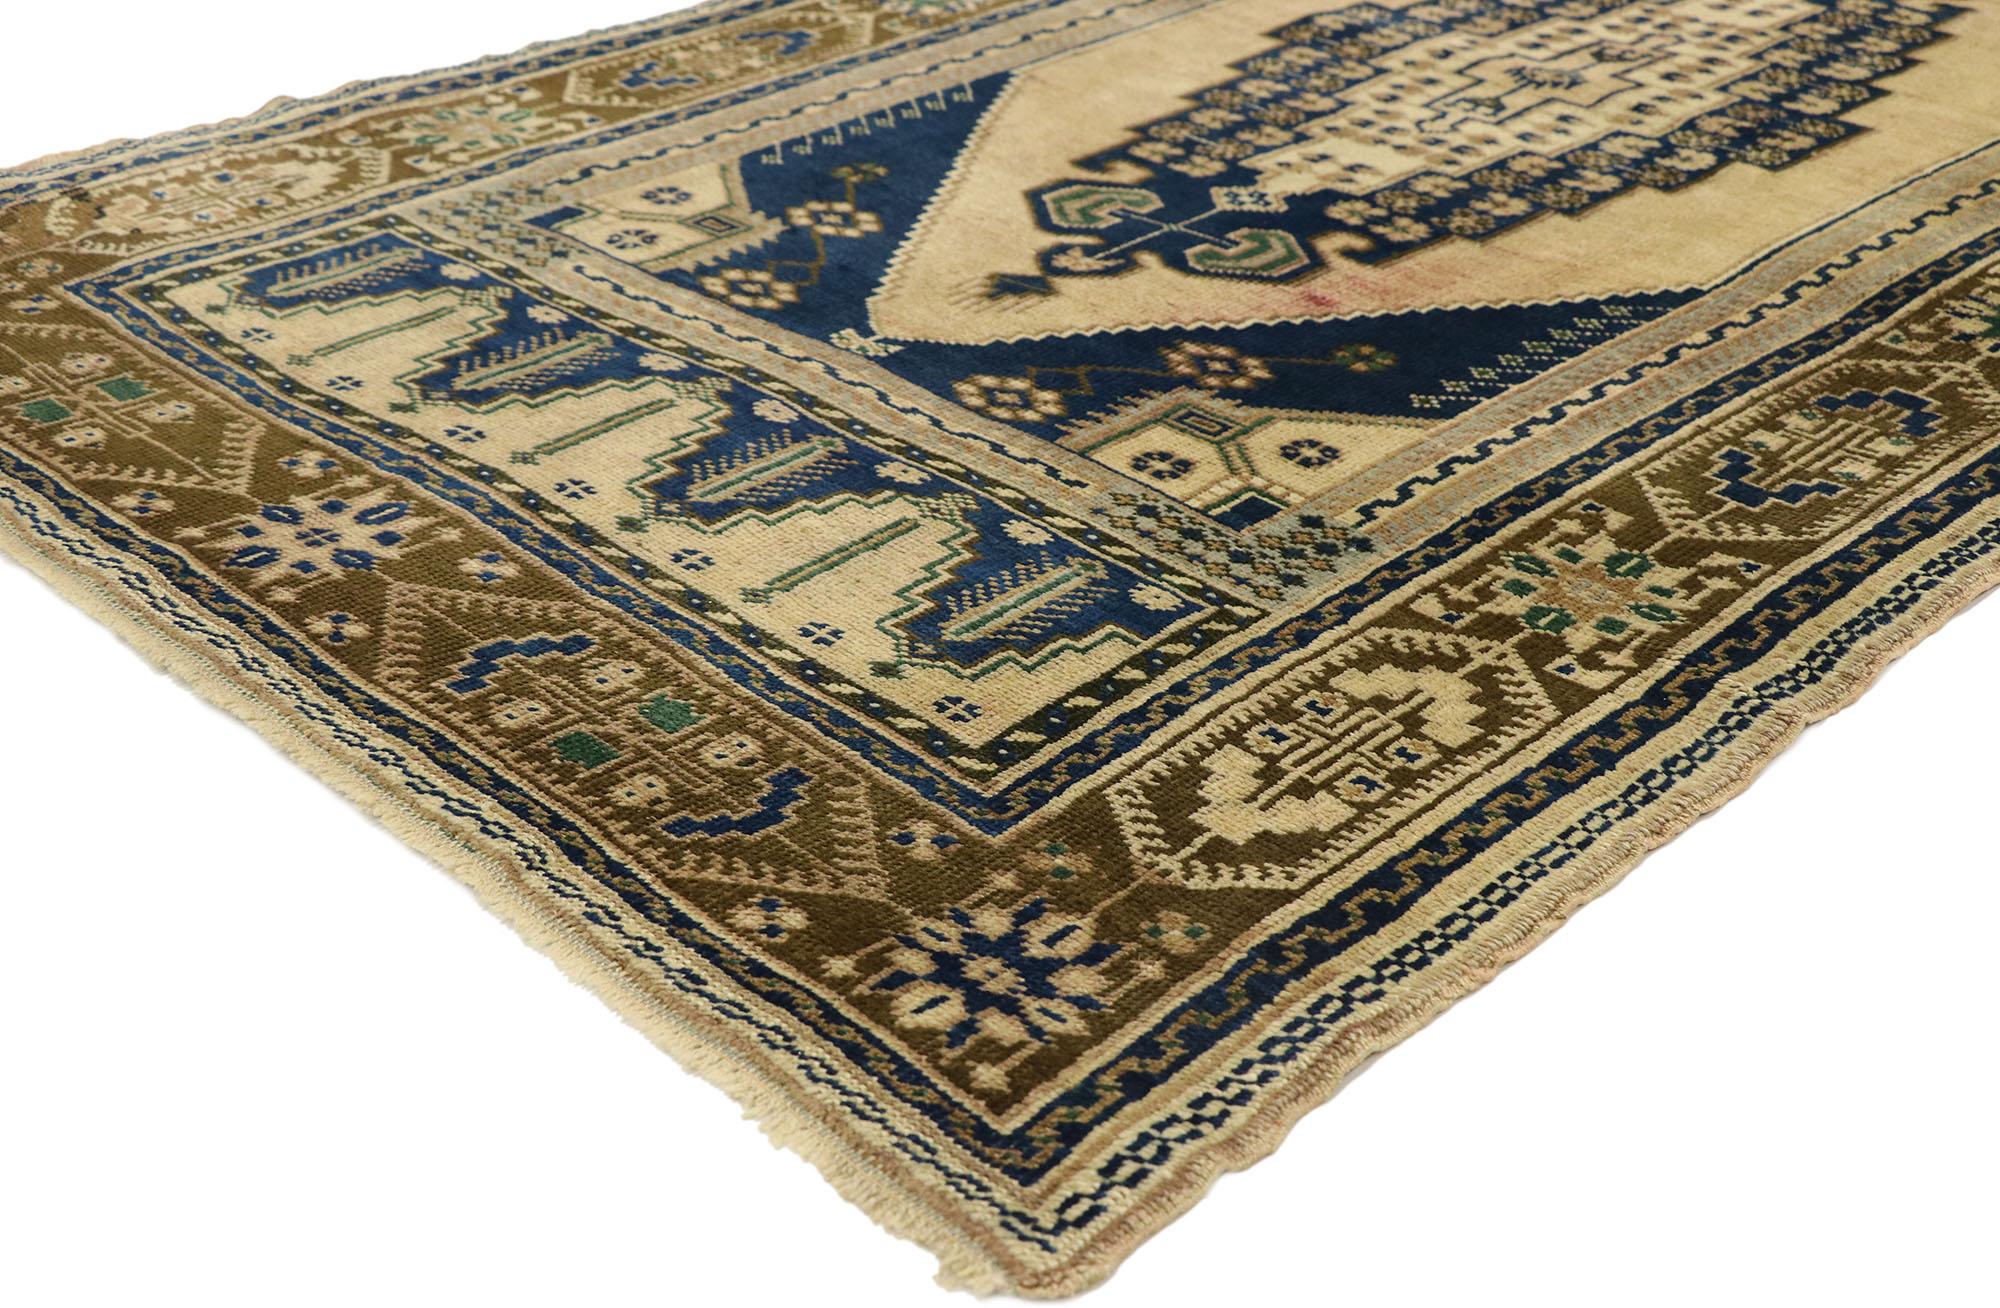 50304 vintage Turkish Oushak rug with modern Greek Mediterranean style. With its warm beige and brilliant blues inspired by modern Mediterranean vibes, this hand knotted wool vintage Turkish Oushak rug is well-balanced and poised to impress. The